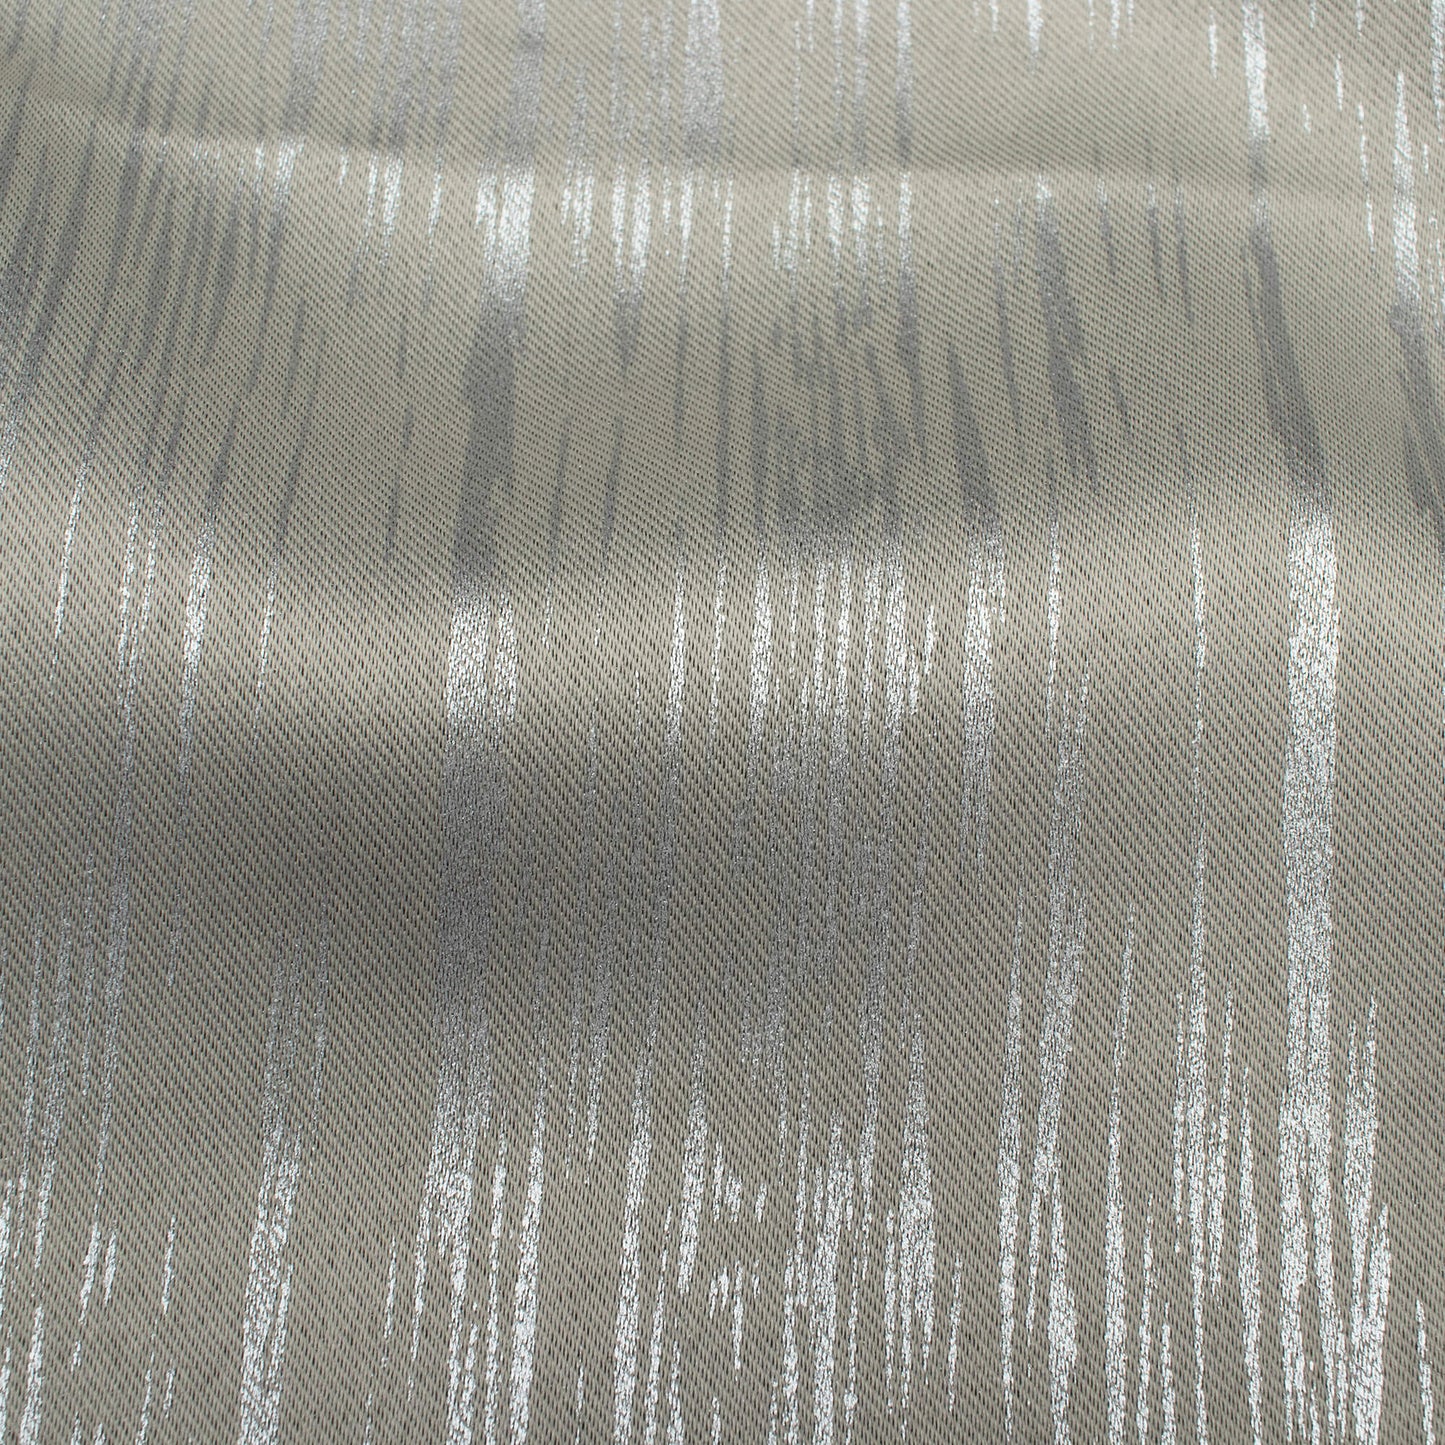 Rino Grey Textured Silver Foil Premium Curtain Fabric (Width 54 Inches)